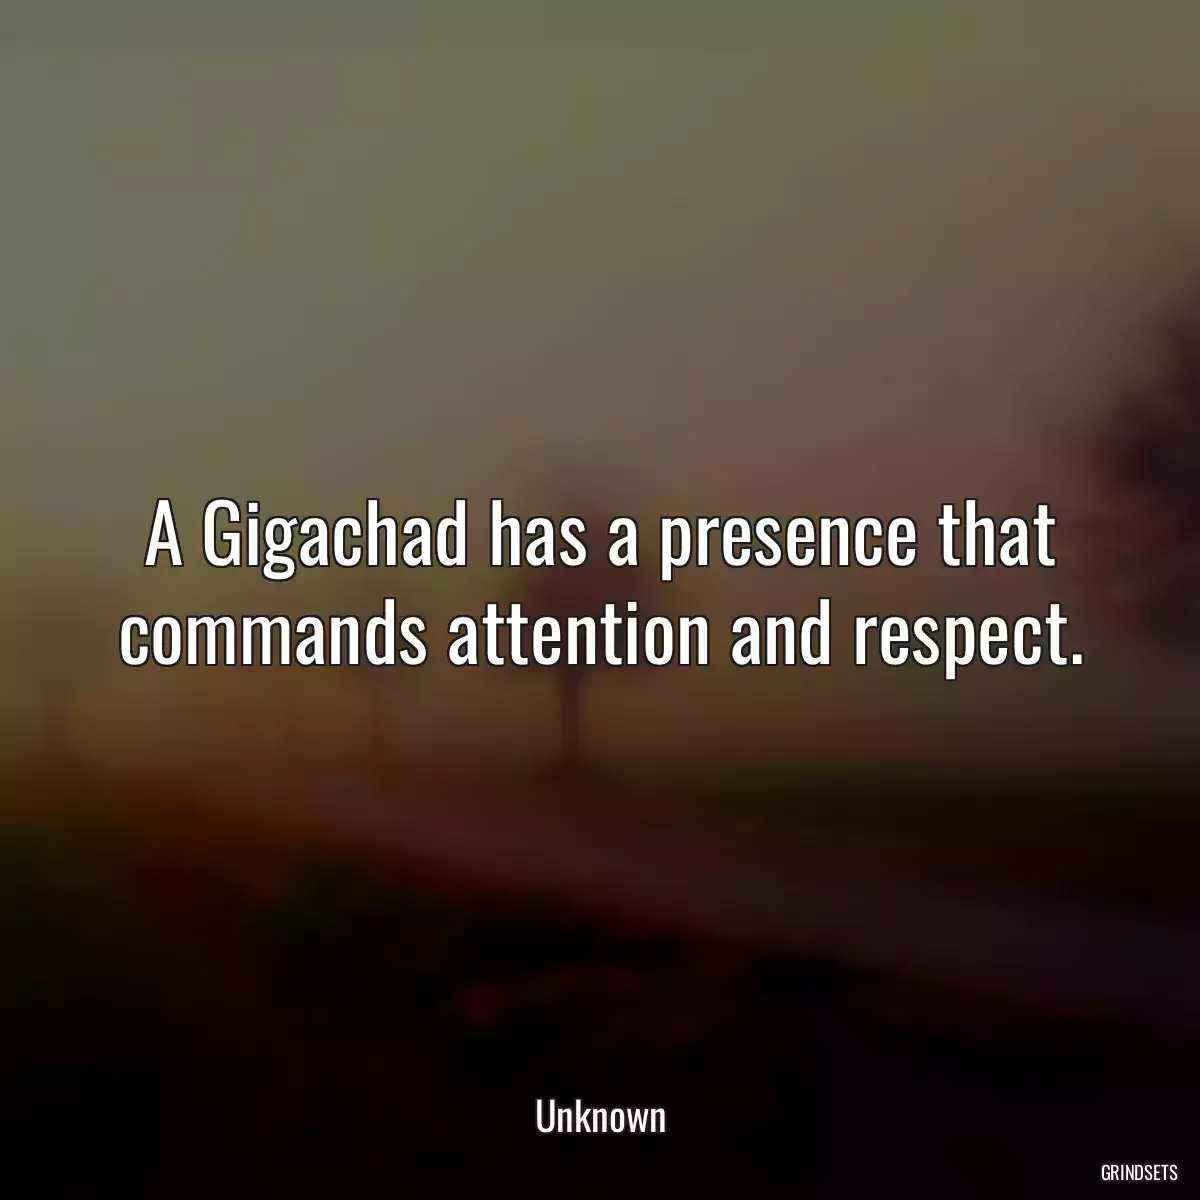 A Gigachad has a presence that commands attention and respect.